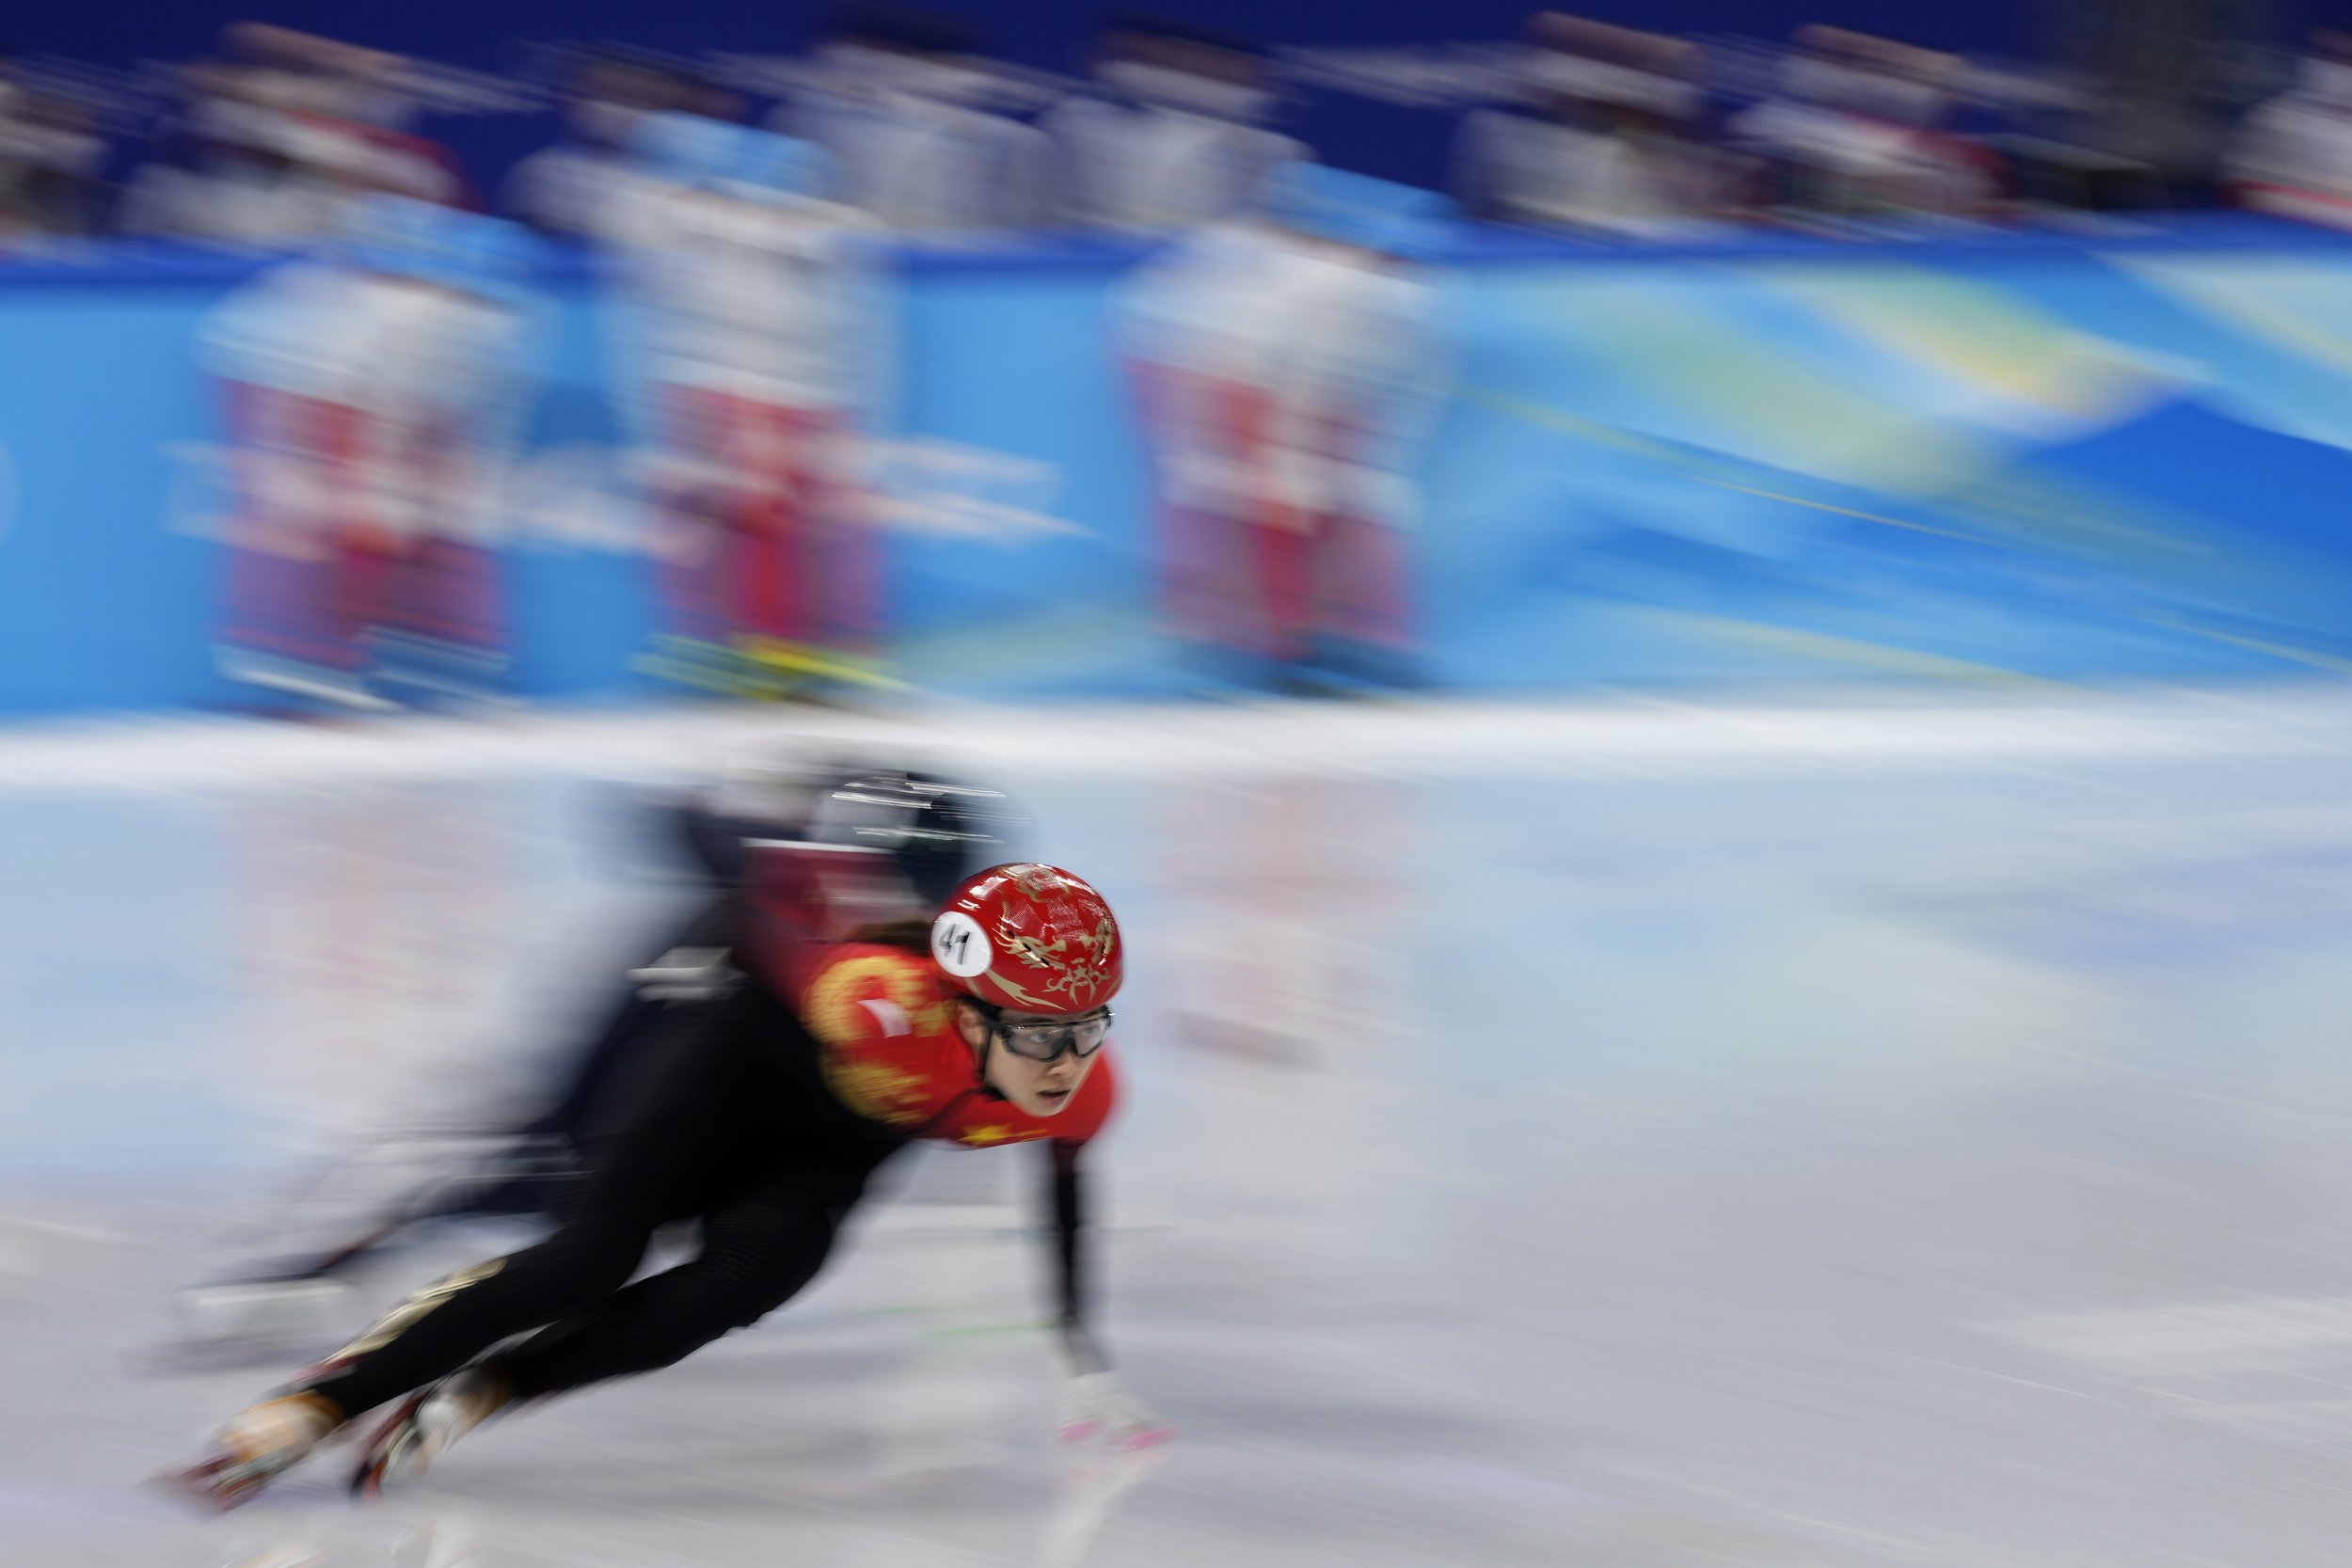  Qu Chunyu of China, races in her heat of the women's 1000-meters during the short track speedskating competition at the 2022 Winter Olympics, Wednesday, Feb. 9, 2022, in Beijing. (AP Photo/Bernat Armangue) 